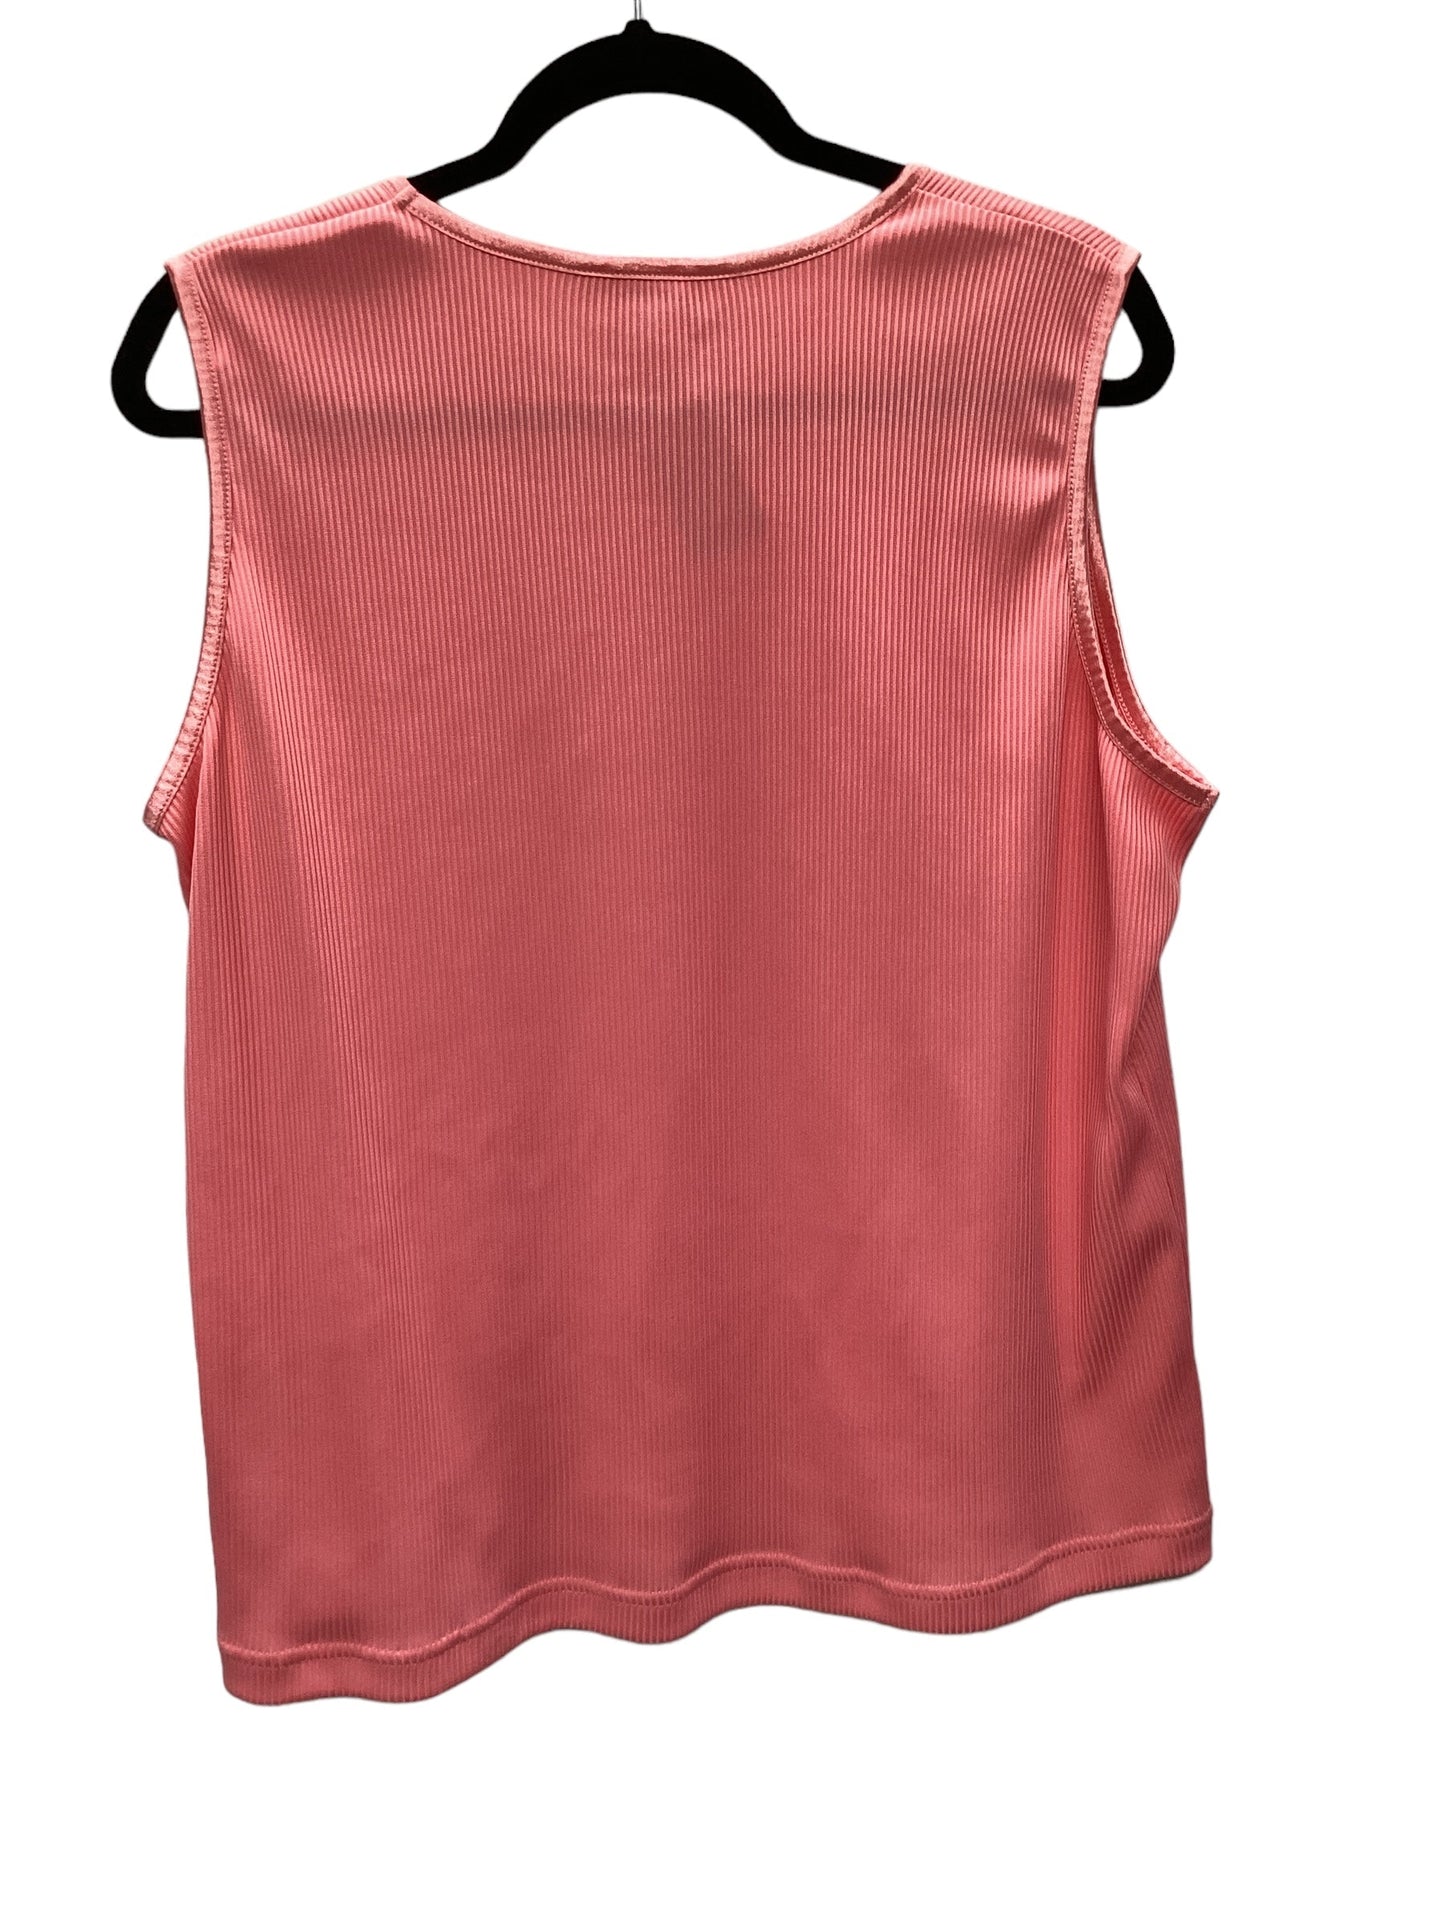 Top Sleeveless Basic By Allison Daley  Size: Xl